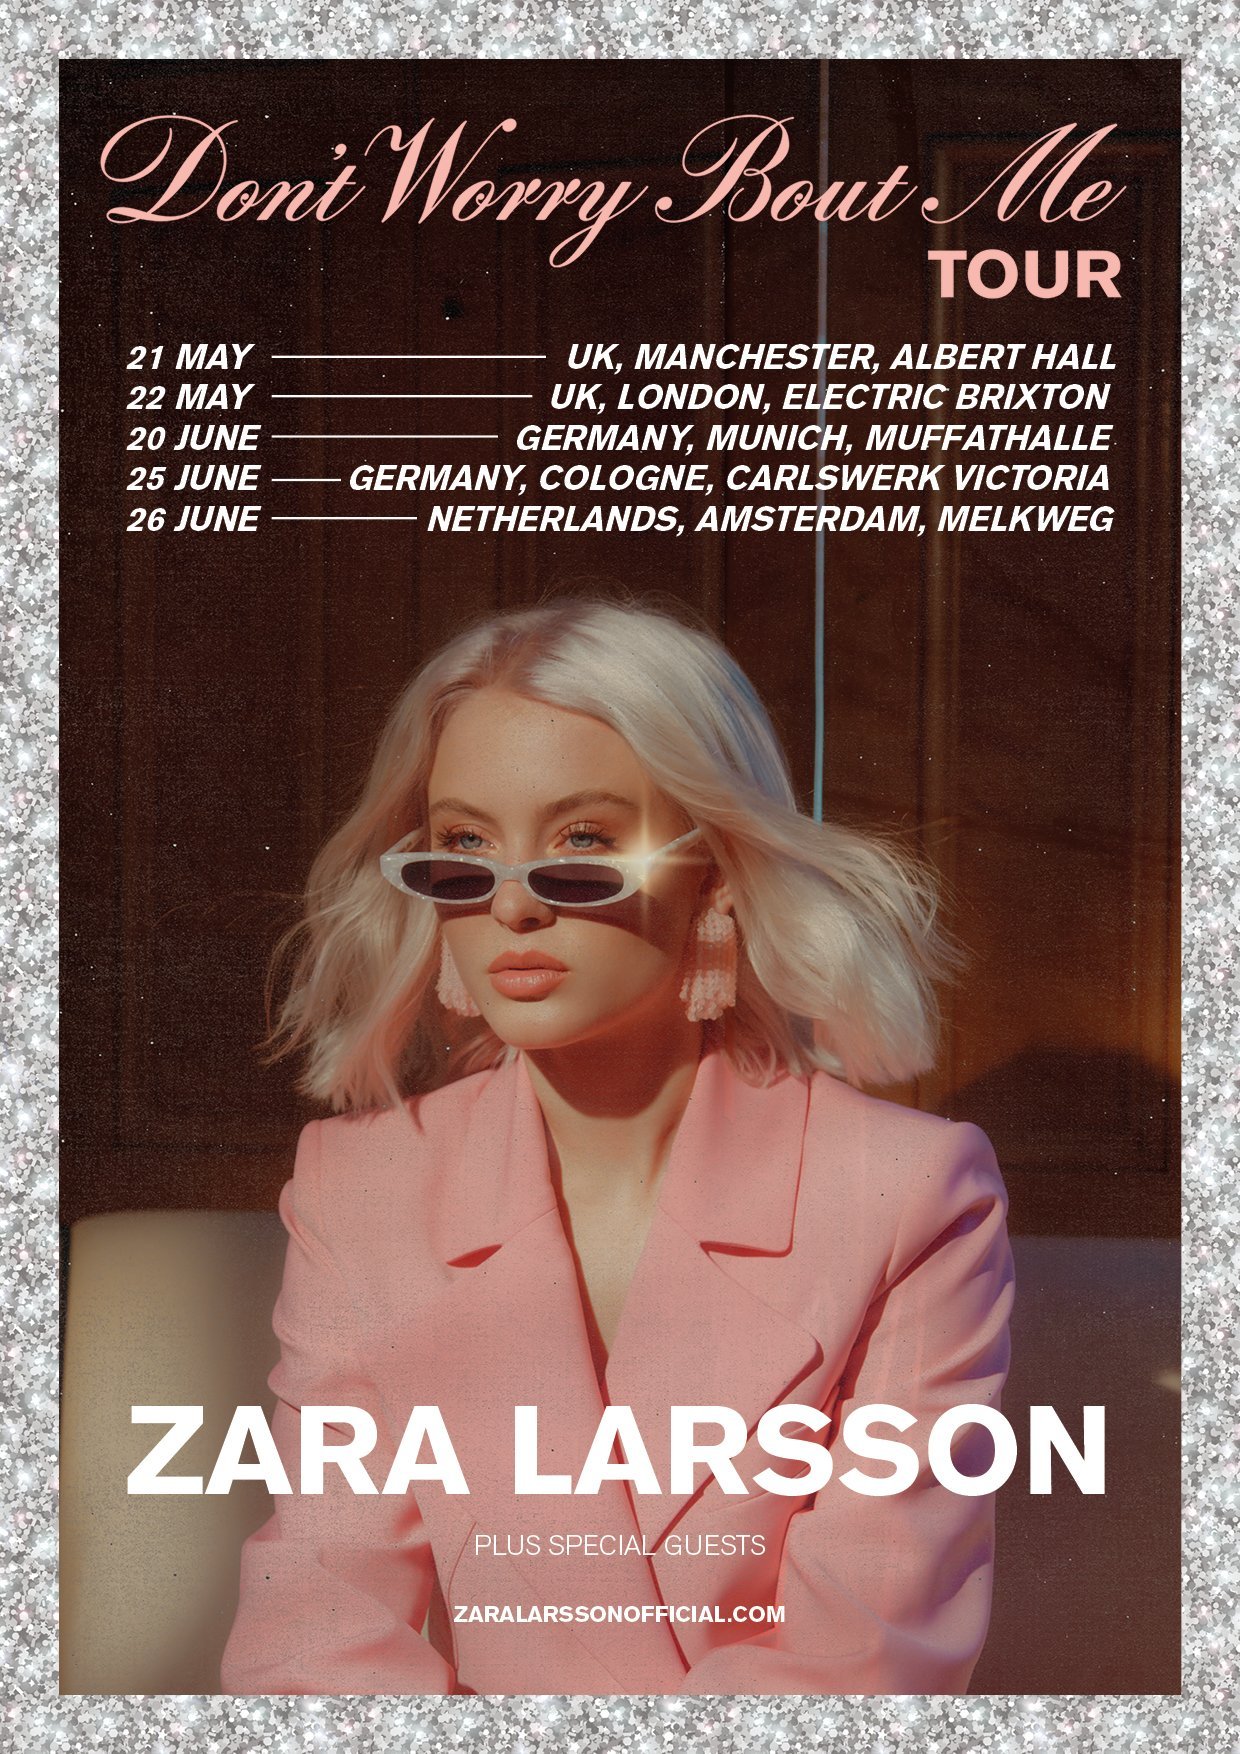 Don't Worry Bout Me Tour at Electric Brixton (London) on 22 May 2019 |  Last.fm